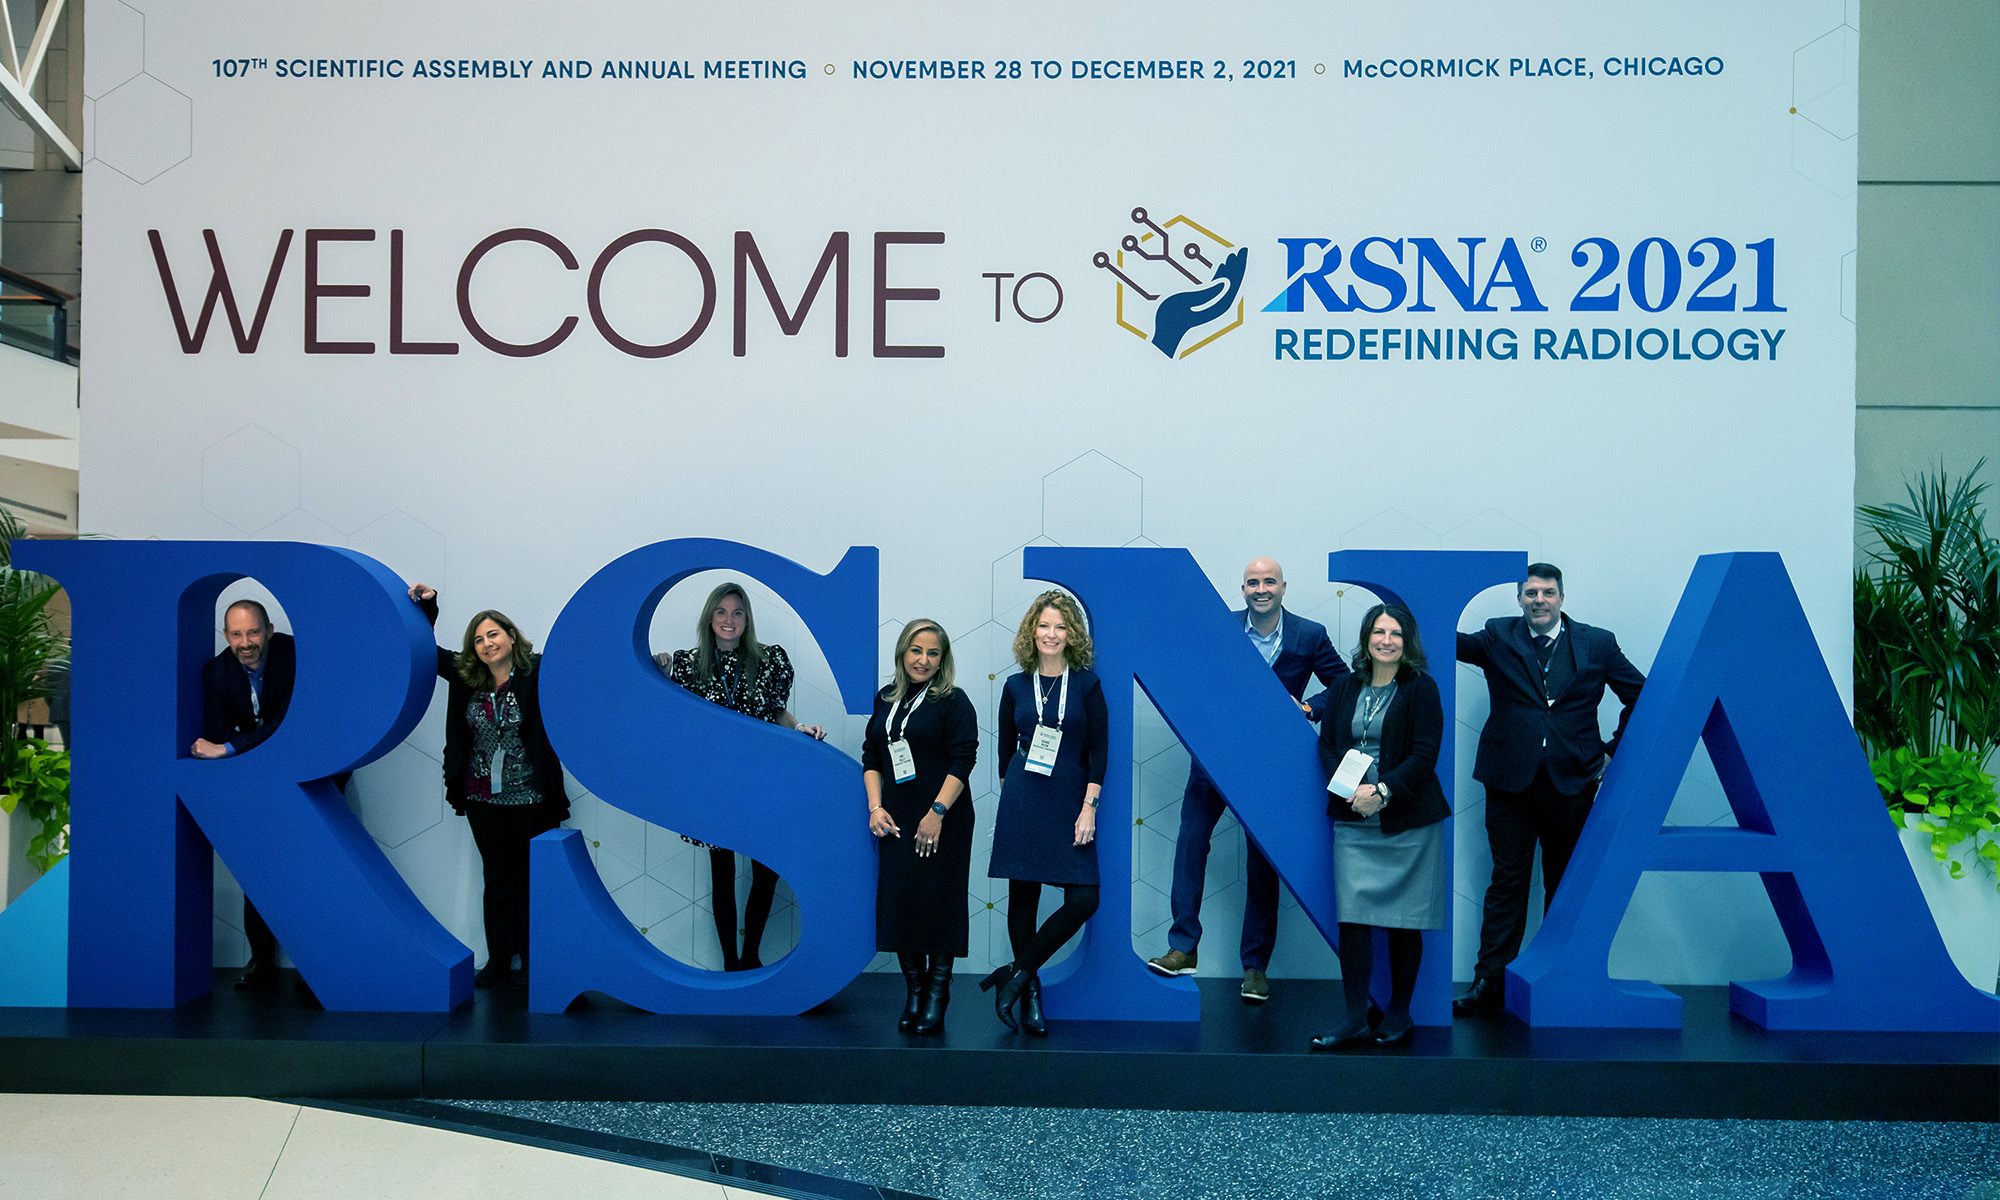 Back in action at 2021 RSNA